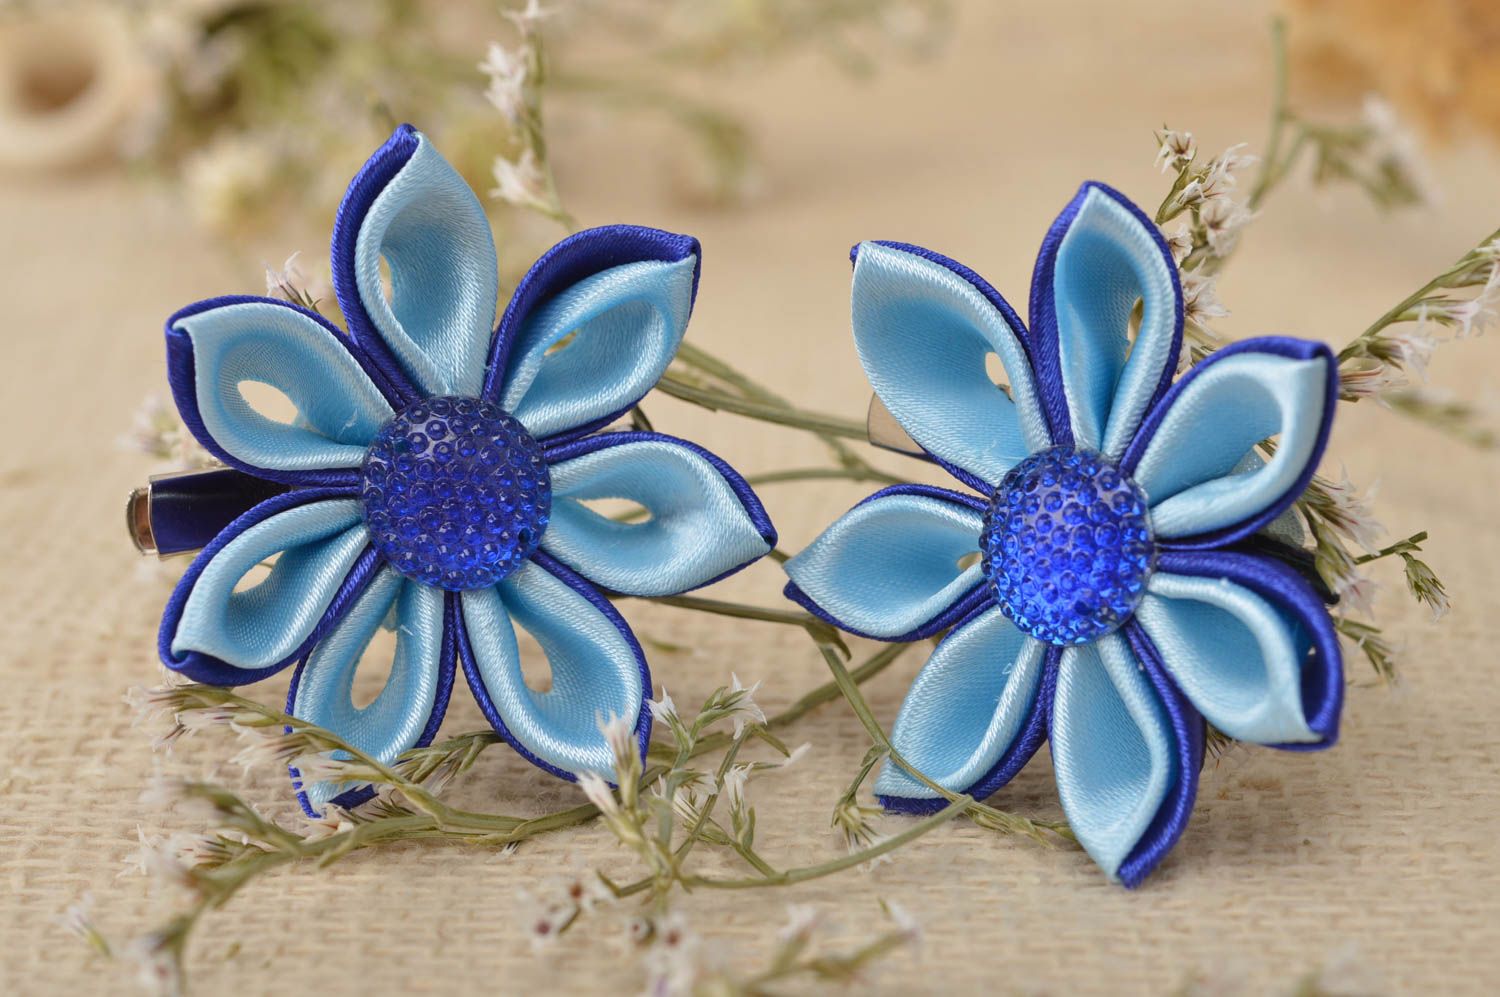 Handmade jewelry set 2 flower hair clips kanzashi flowers gifts for girls photo 1